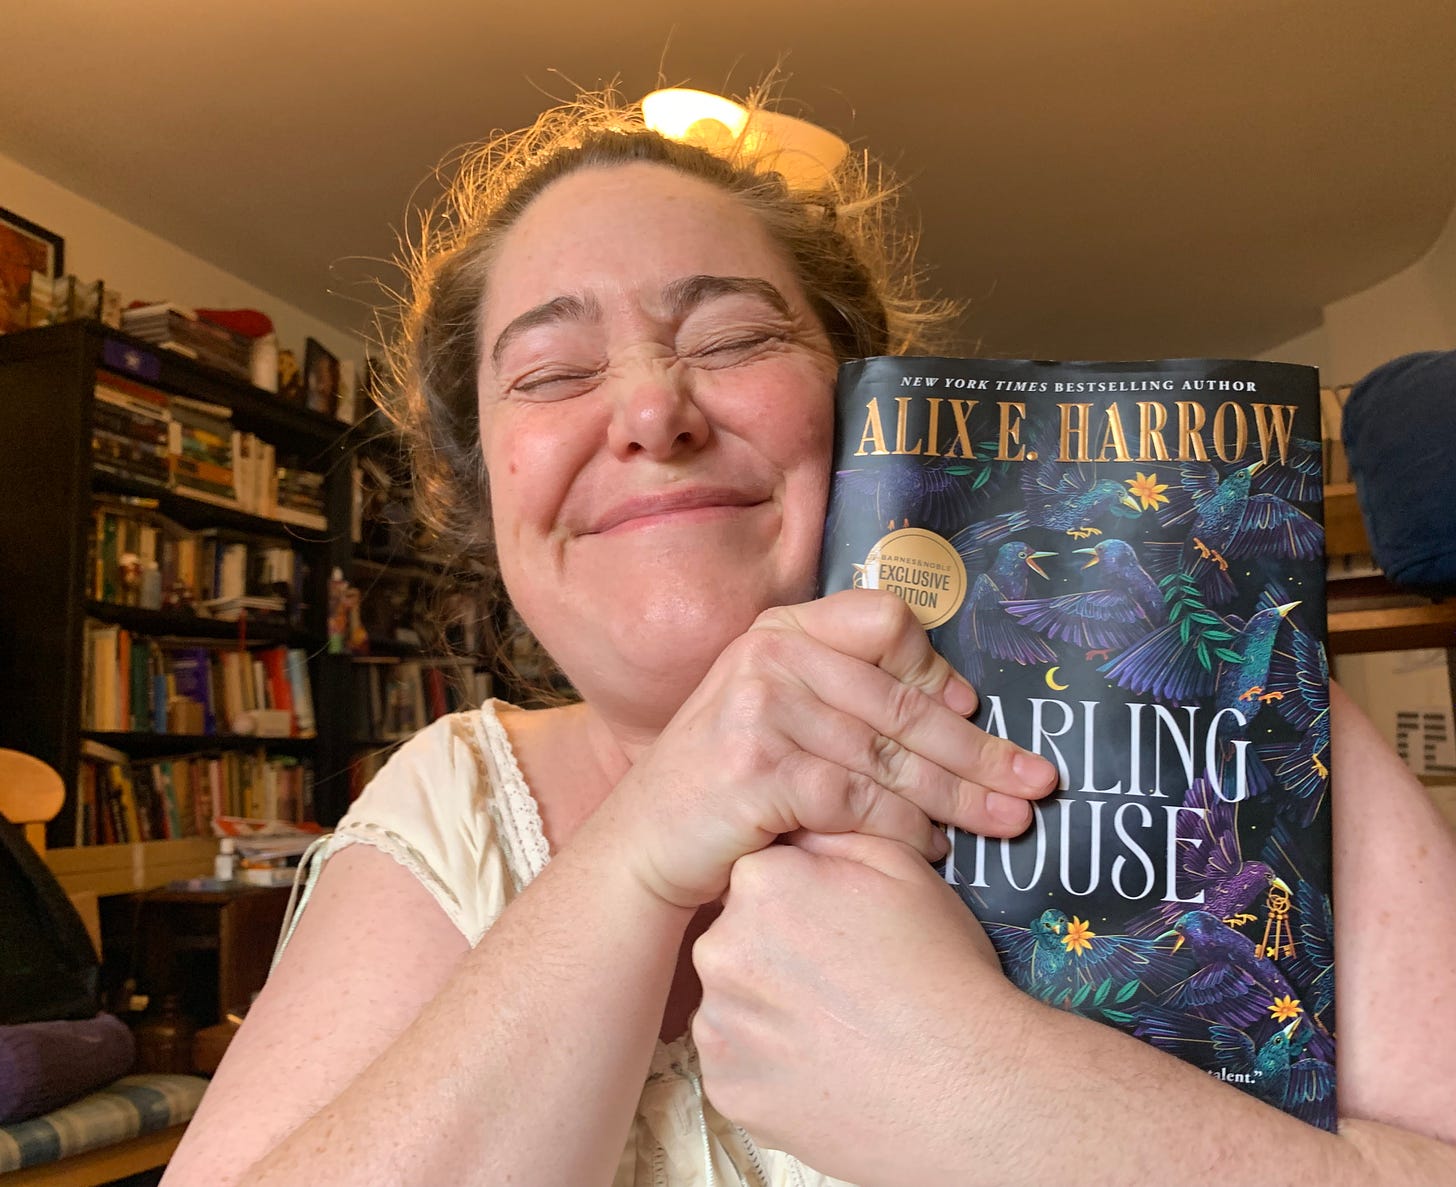 image of the writer, hugging the book "Starling House," looking blissful